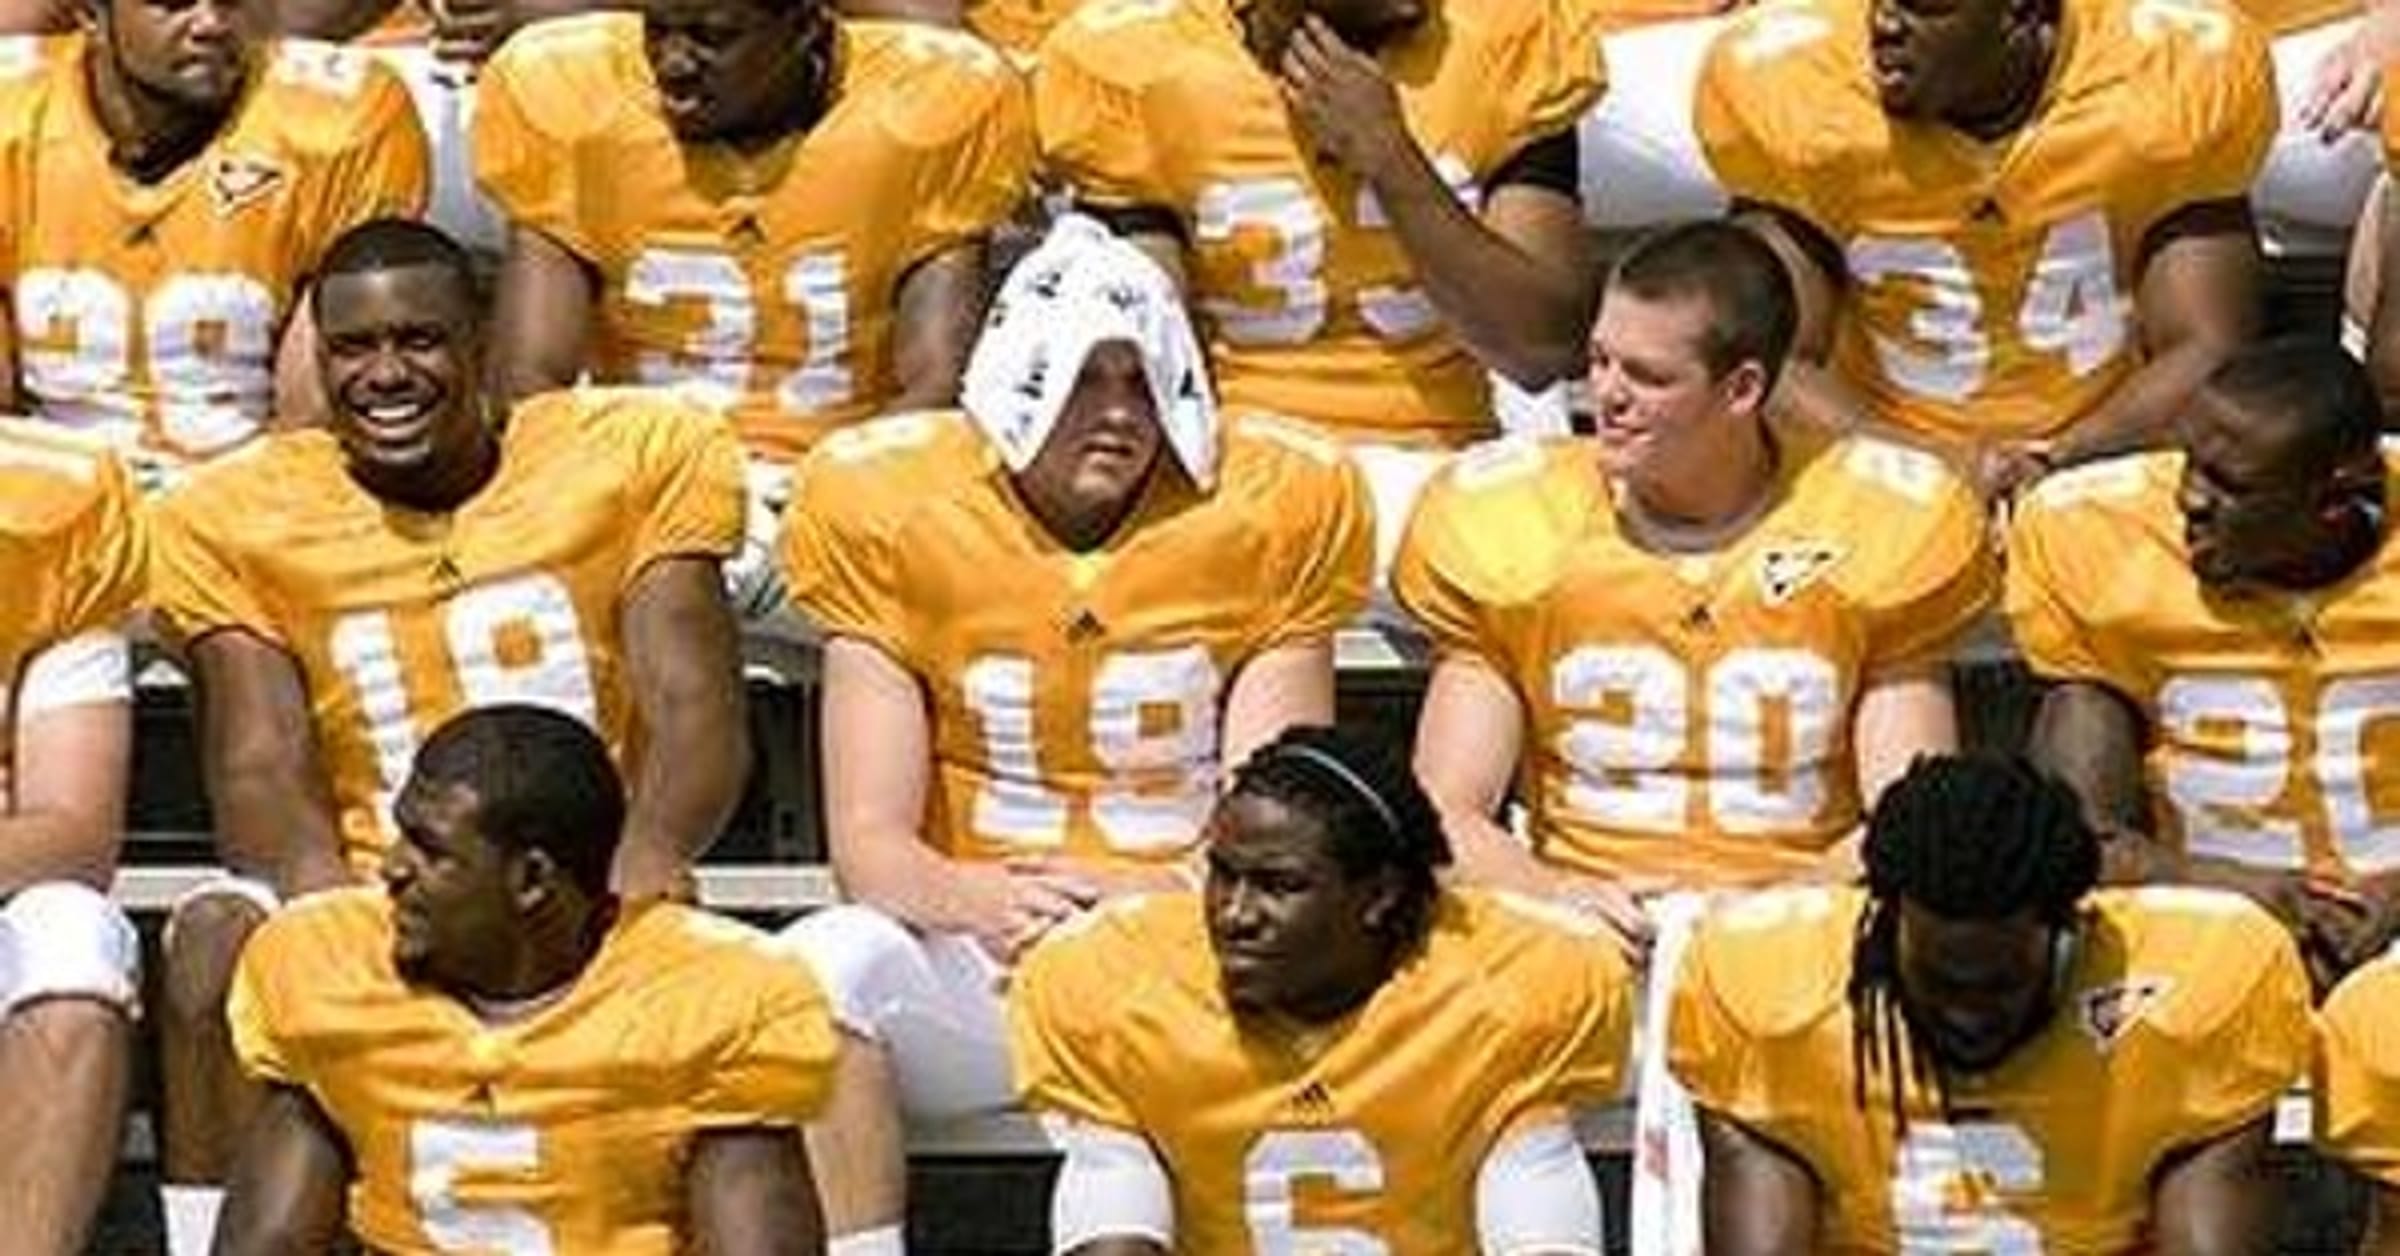 Tennessee football: Players who wore No. 51